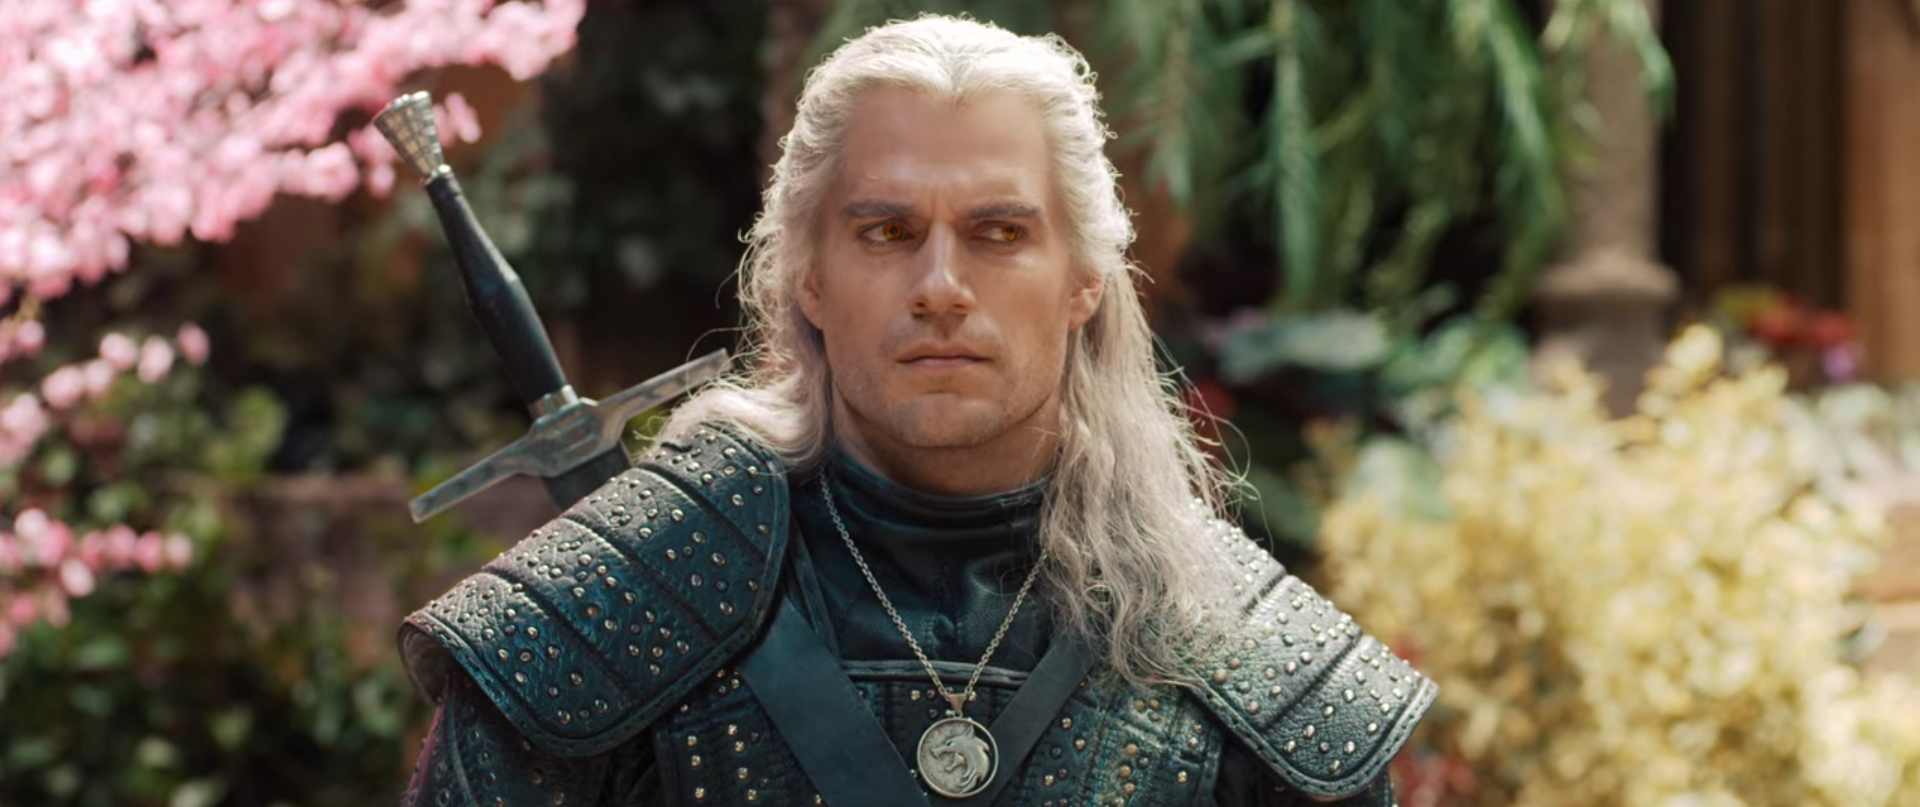 The Witcher: The End’s Beginning. Image Credit: Netflix.